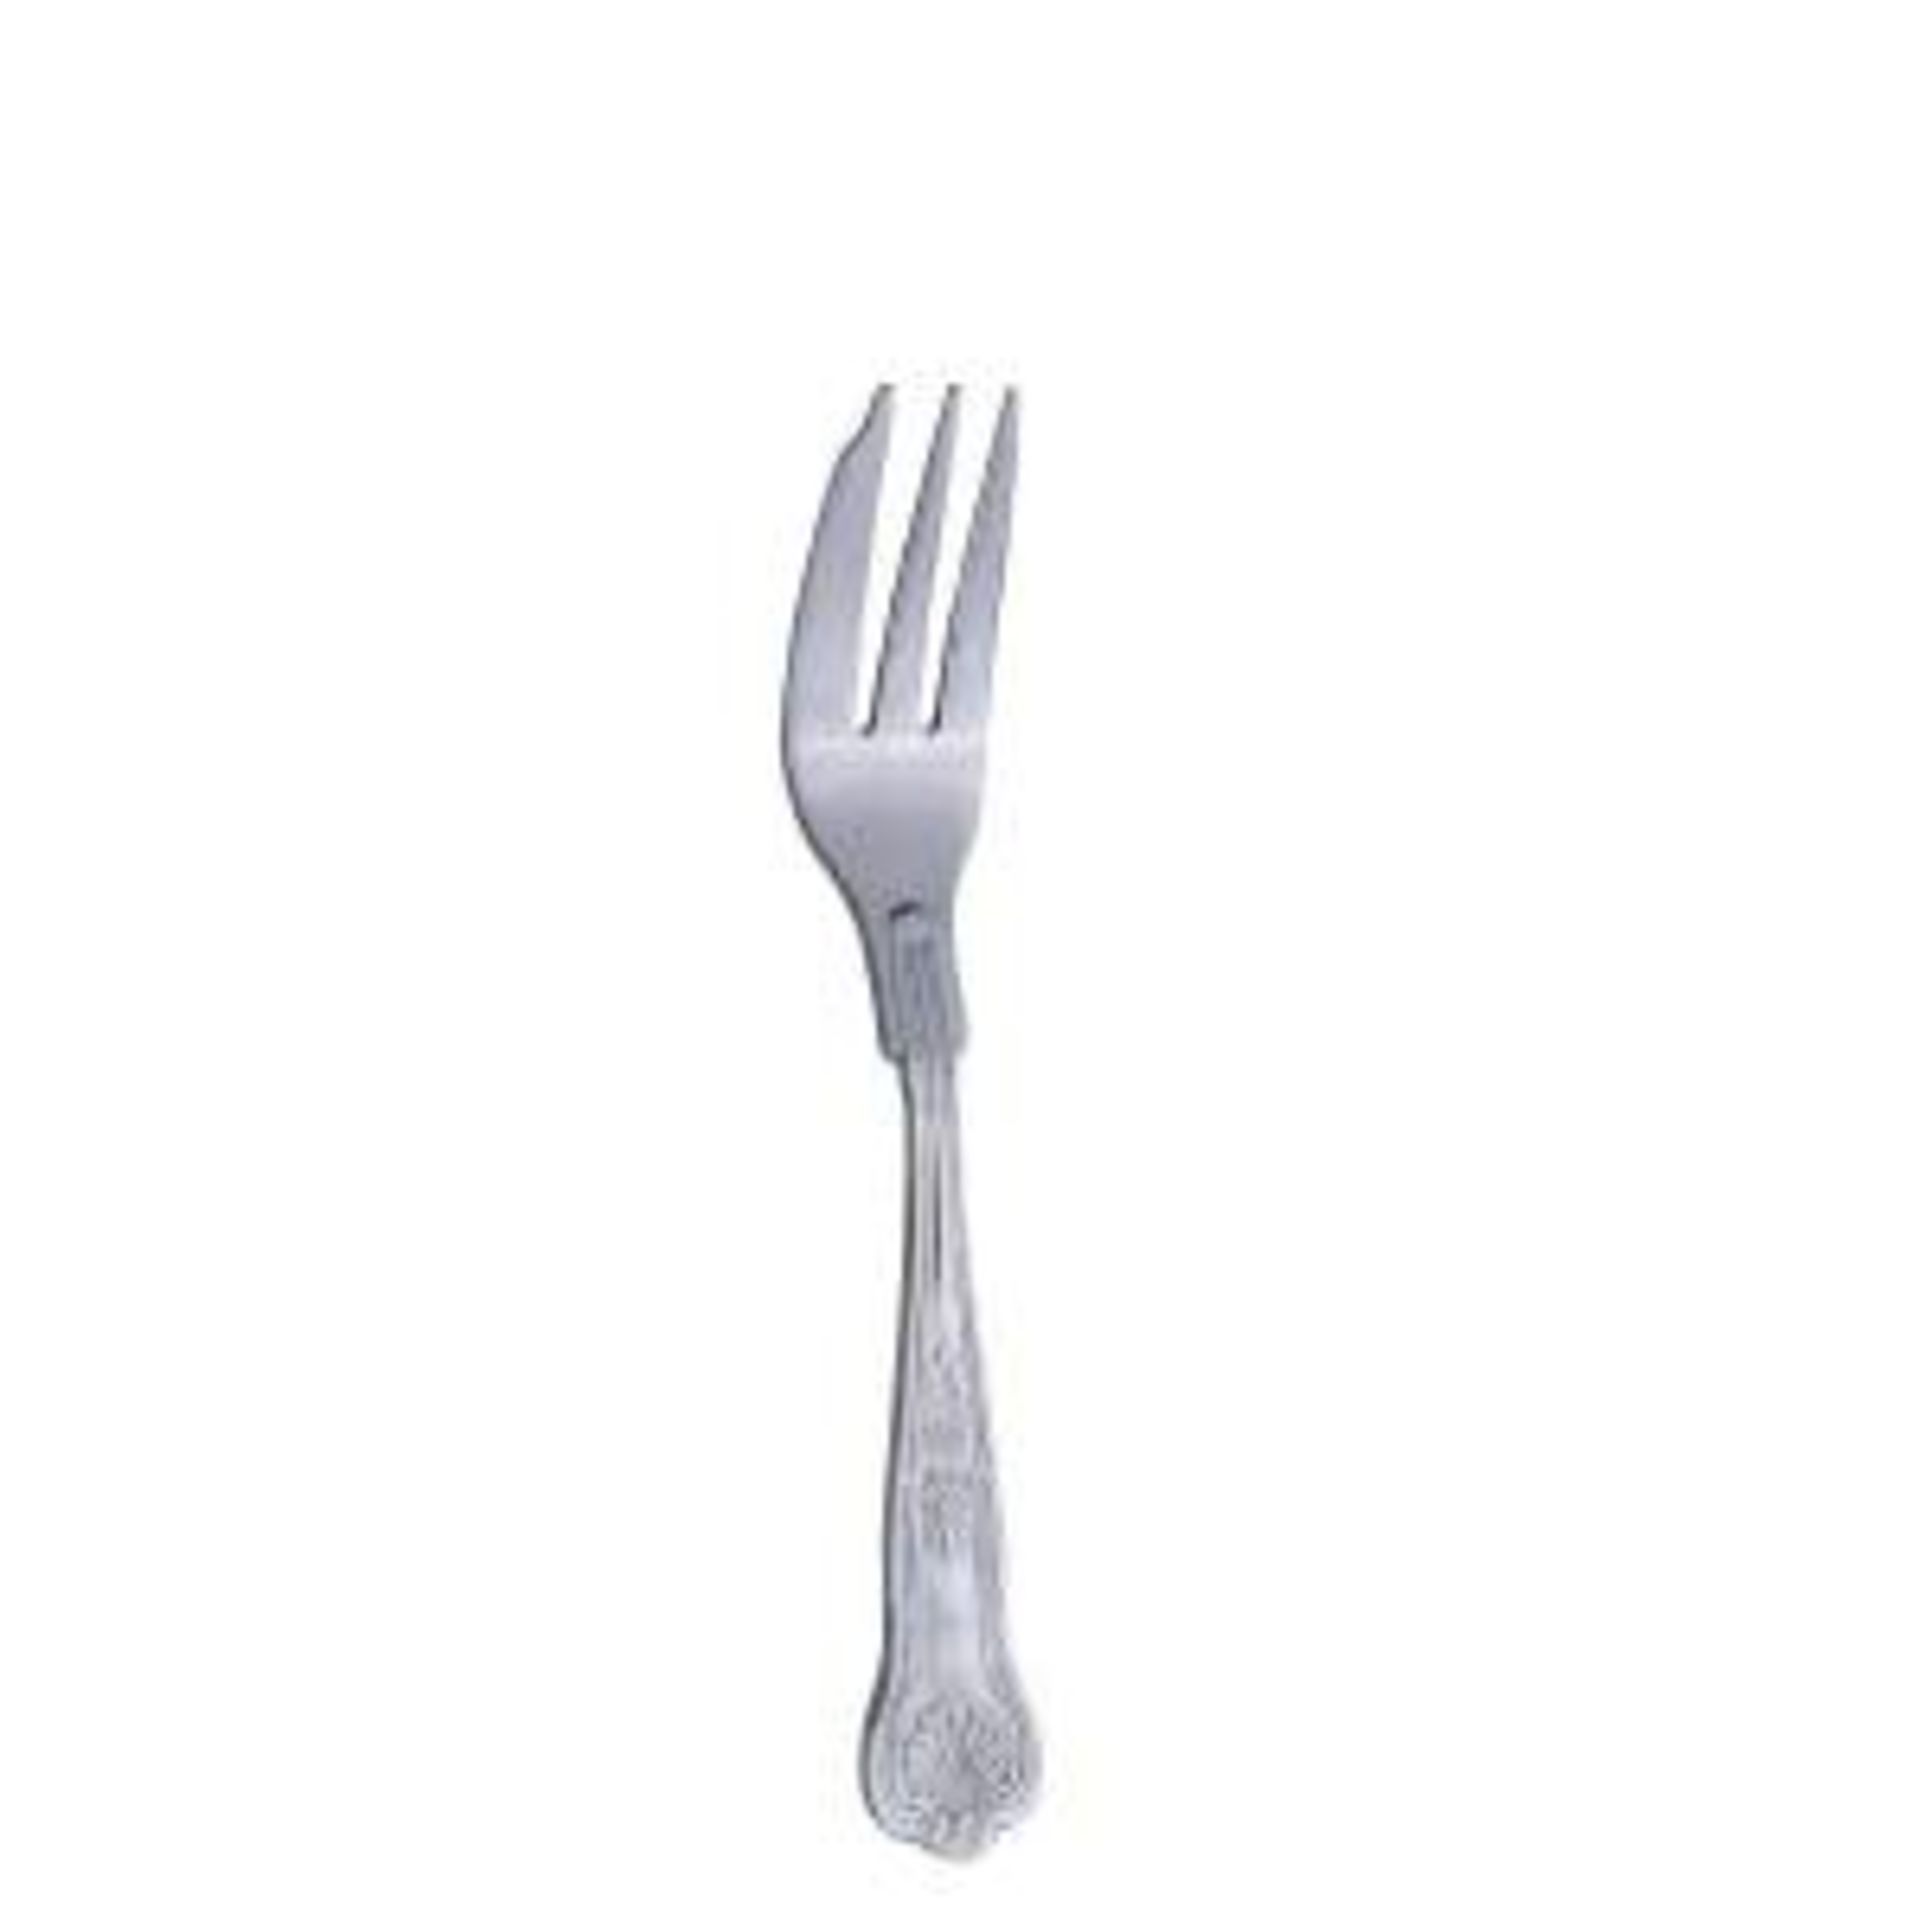 * Kings Cutlery Set, Stainless Steel, 100 x kings large fork, small fork, pastry/canape fork - Colle - Image 2 of 2